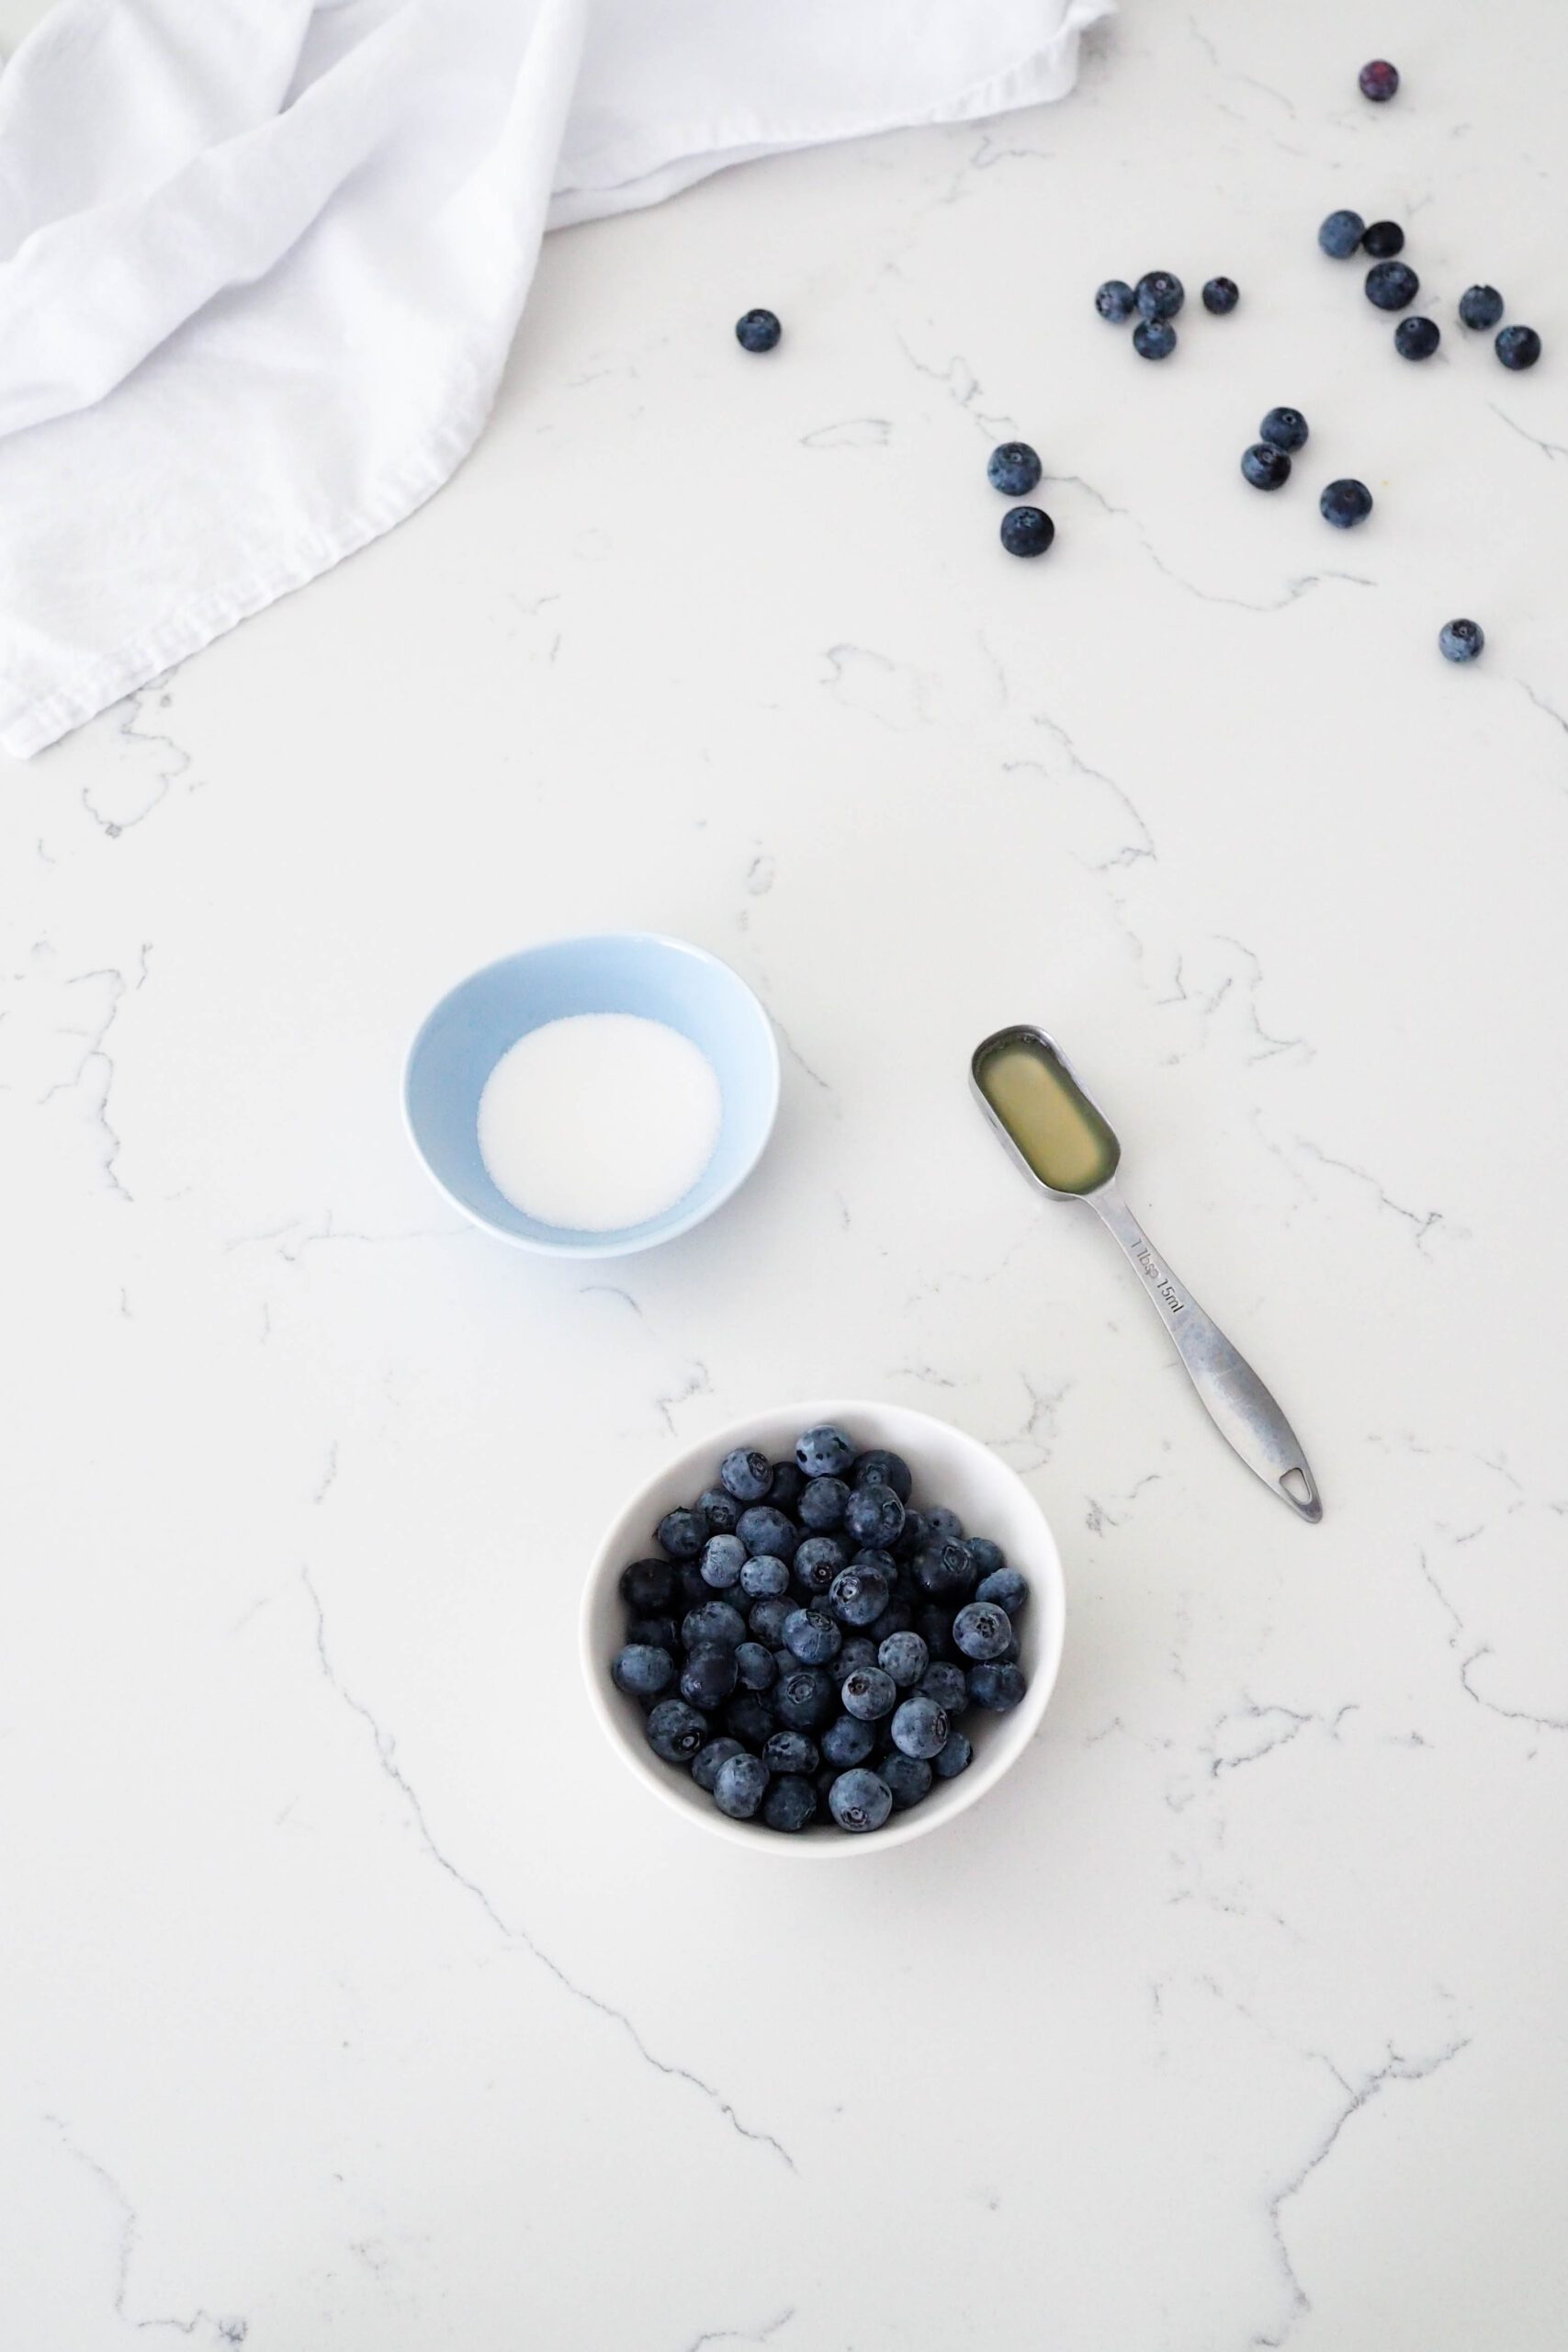 Blueberries, sugar, and lemon juice on a marble counter.